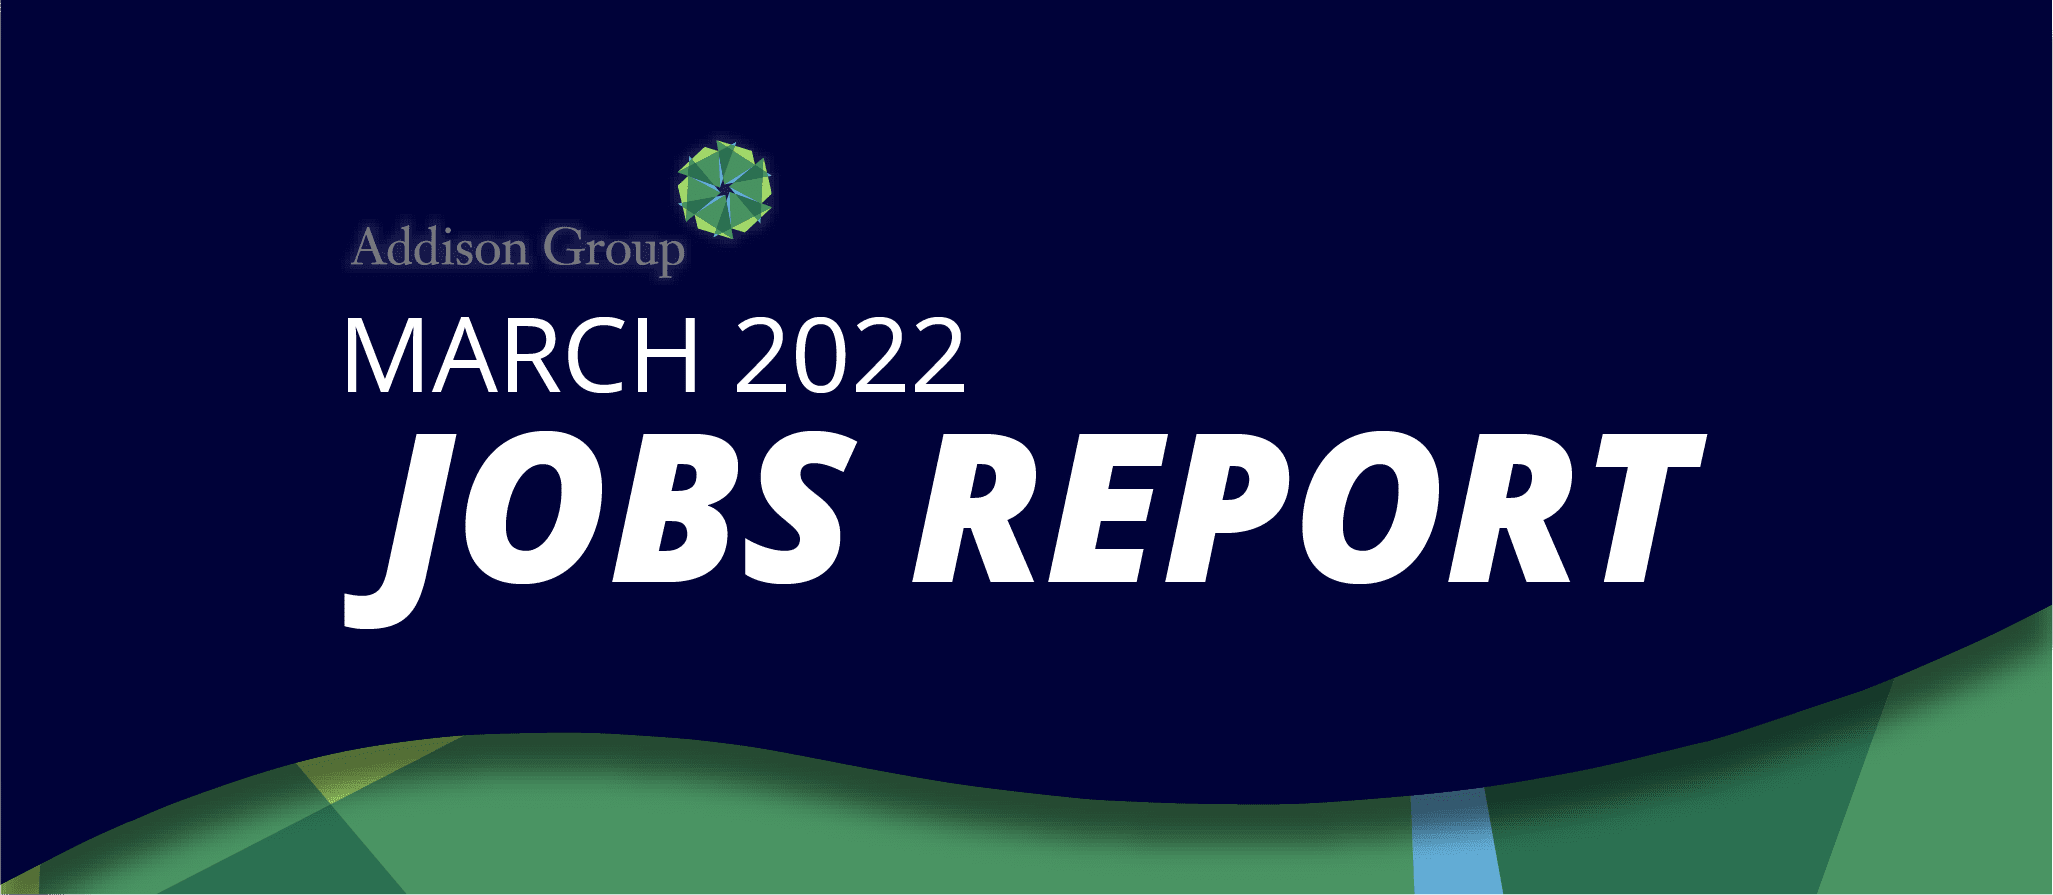 Addison Group Jobs Report March 2022